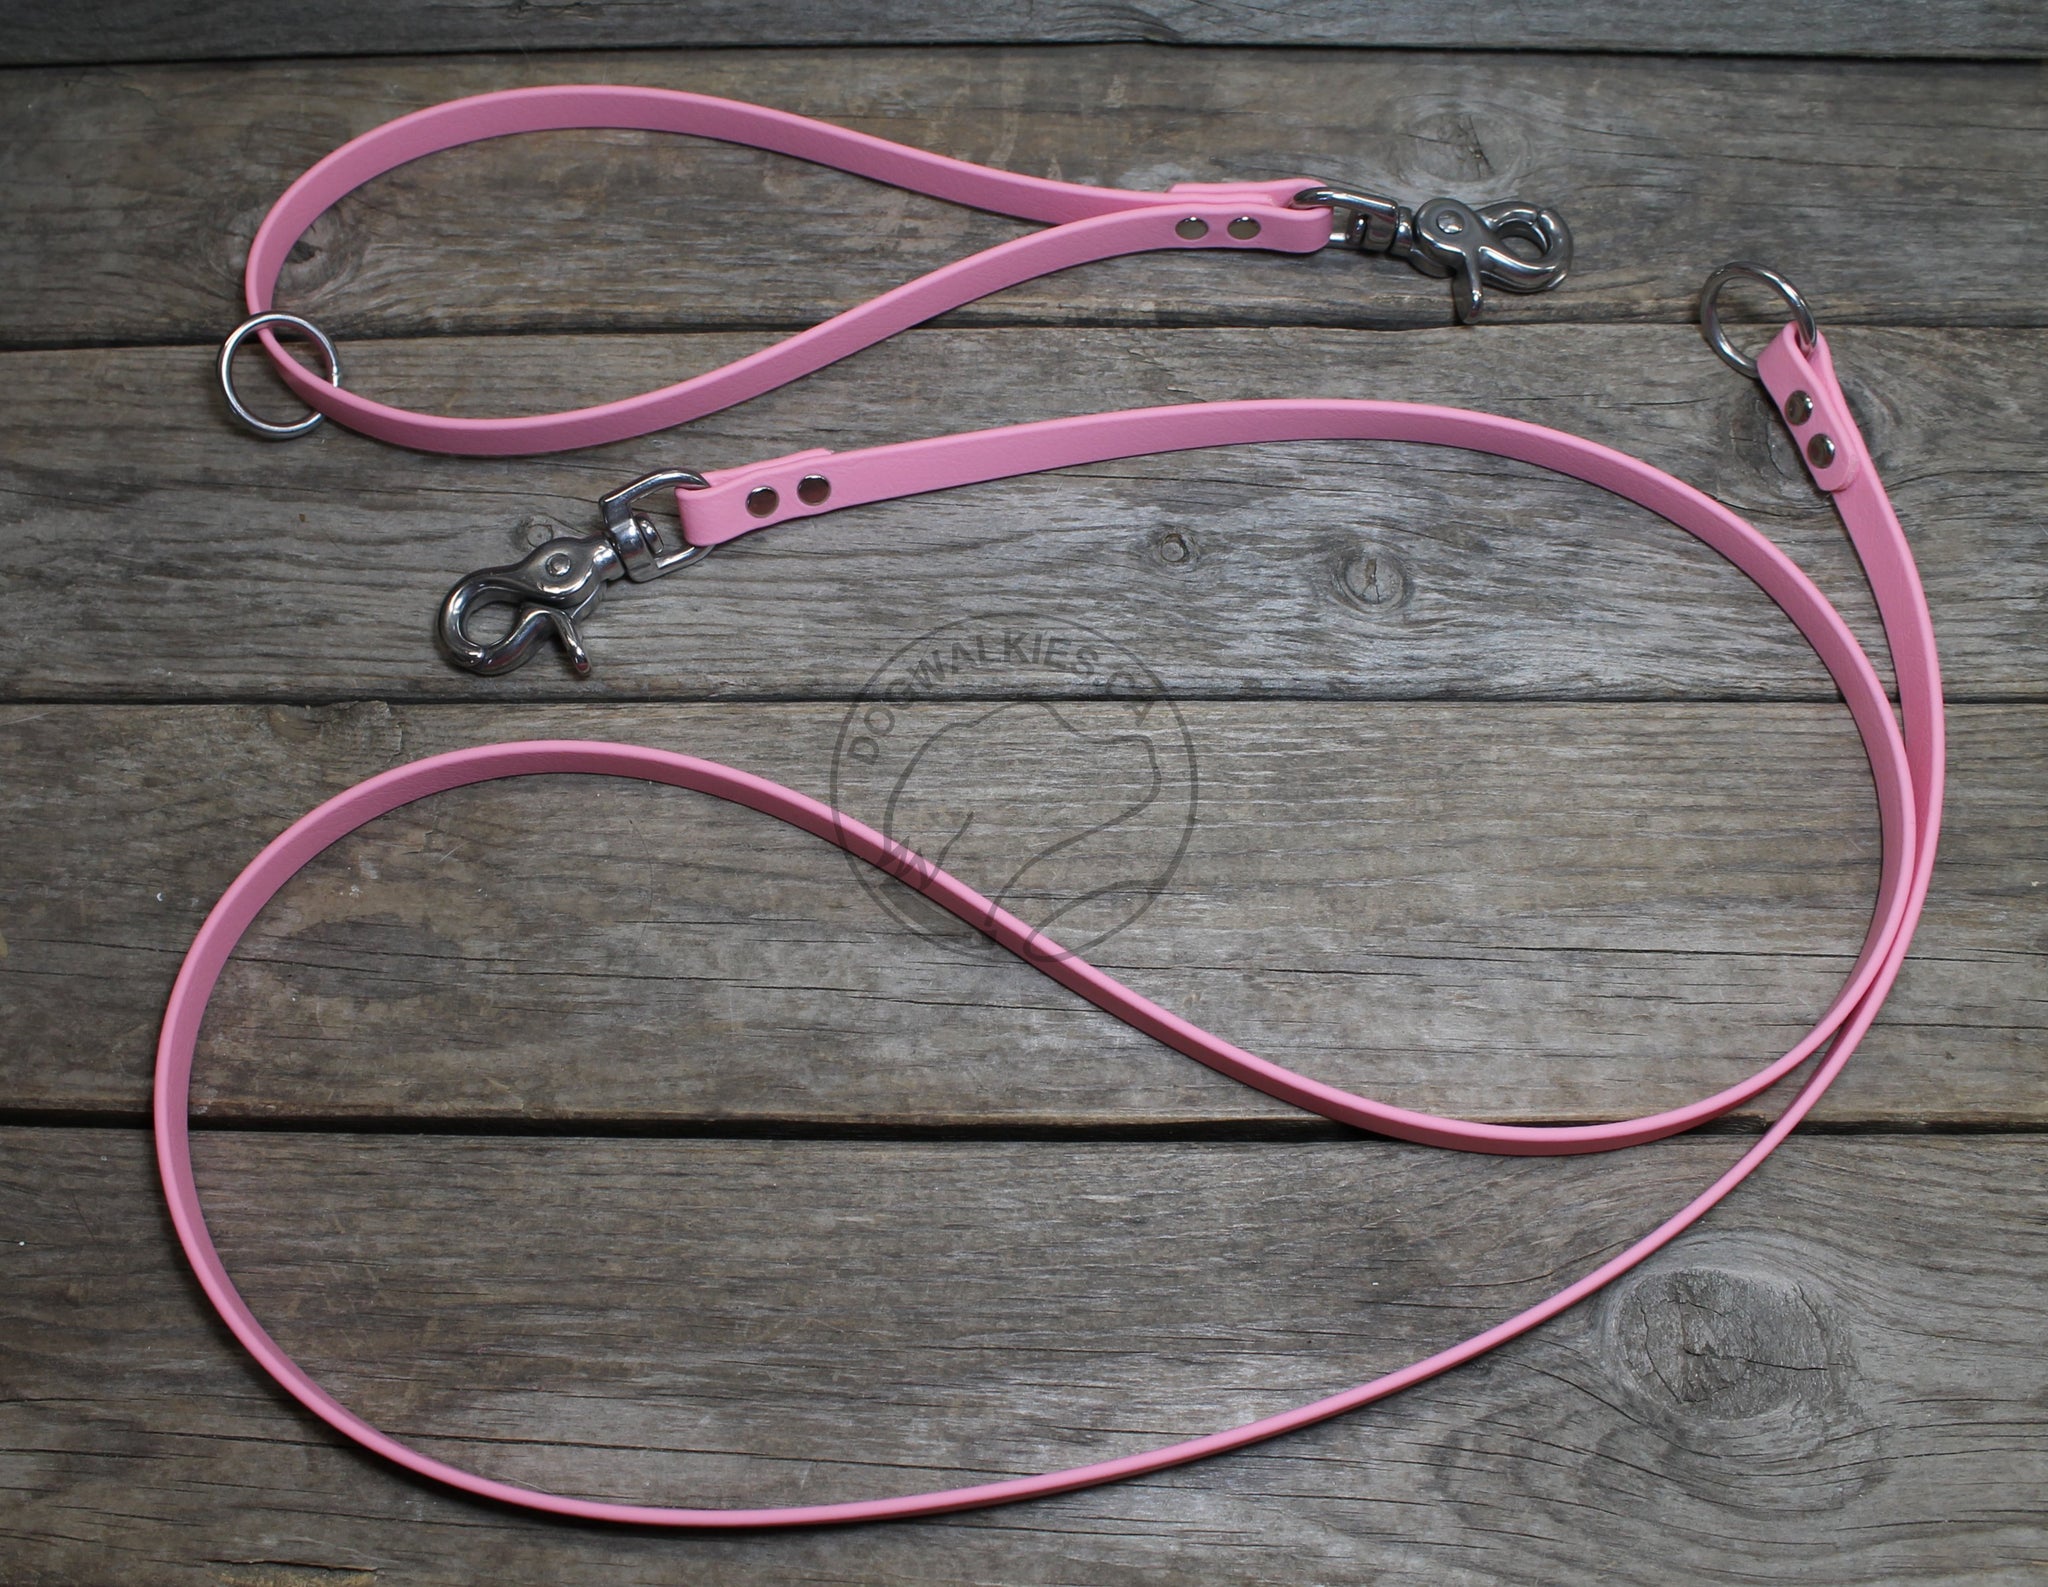 Two Section Leash, Handle with Drag Line - Biothane Dog Leash 12mm (1/2") wide